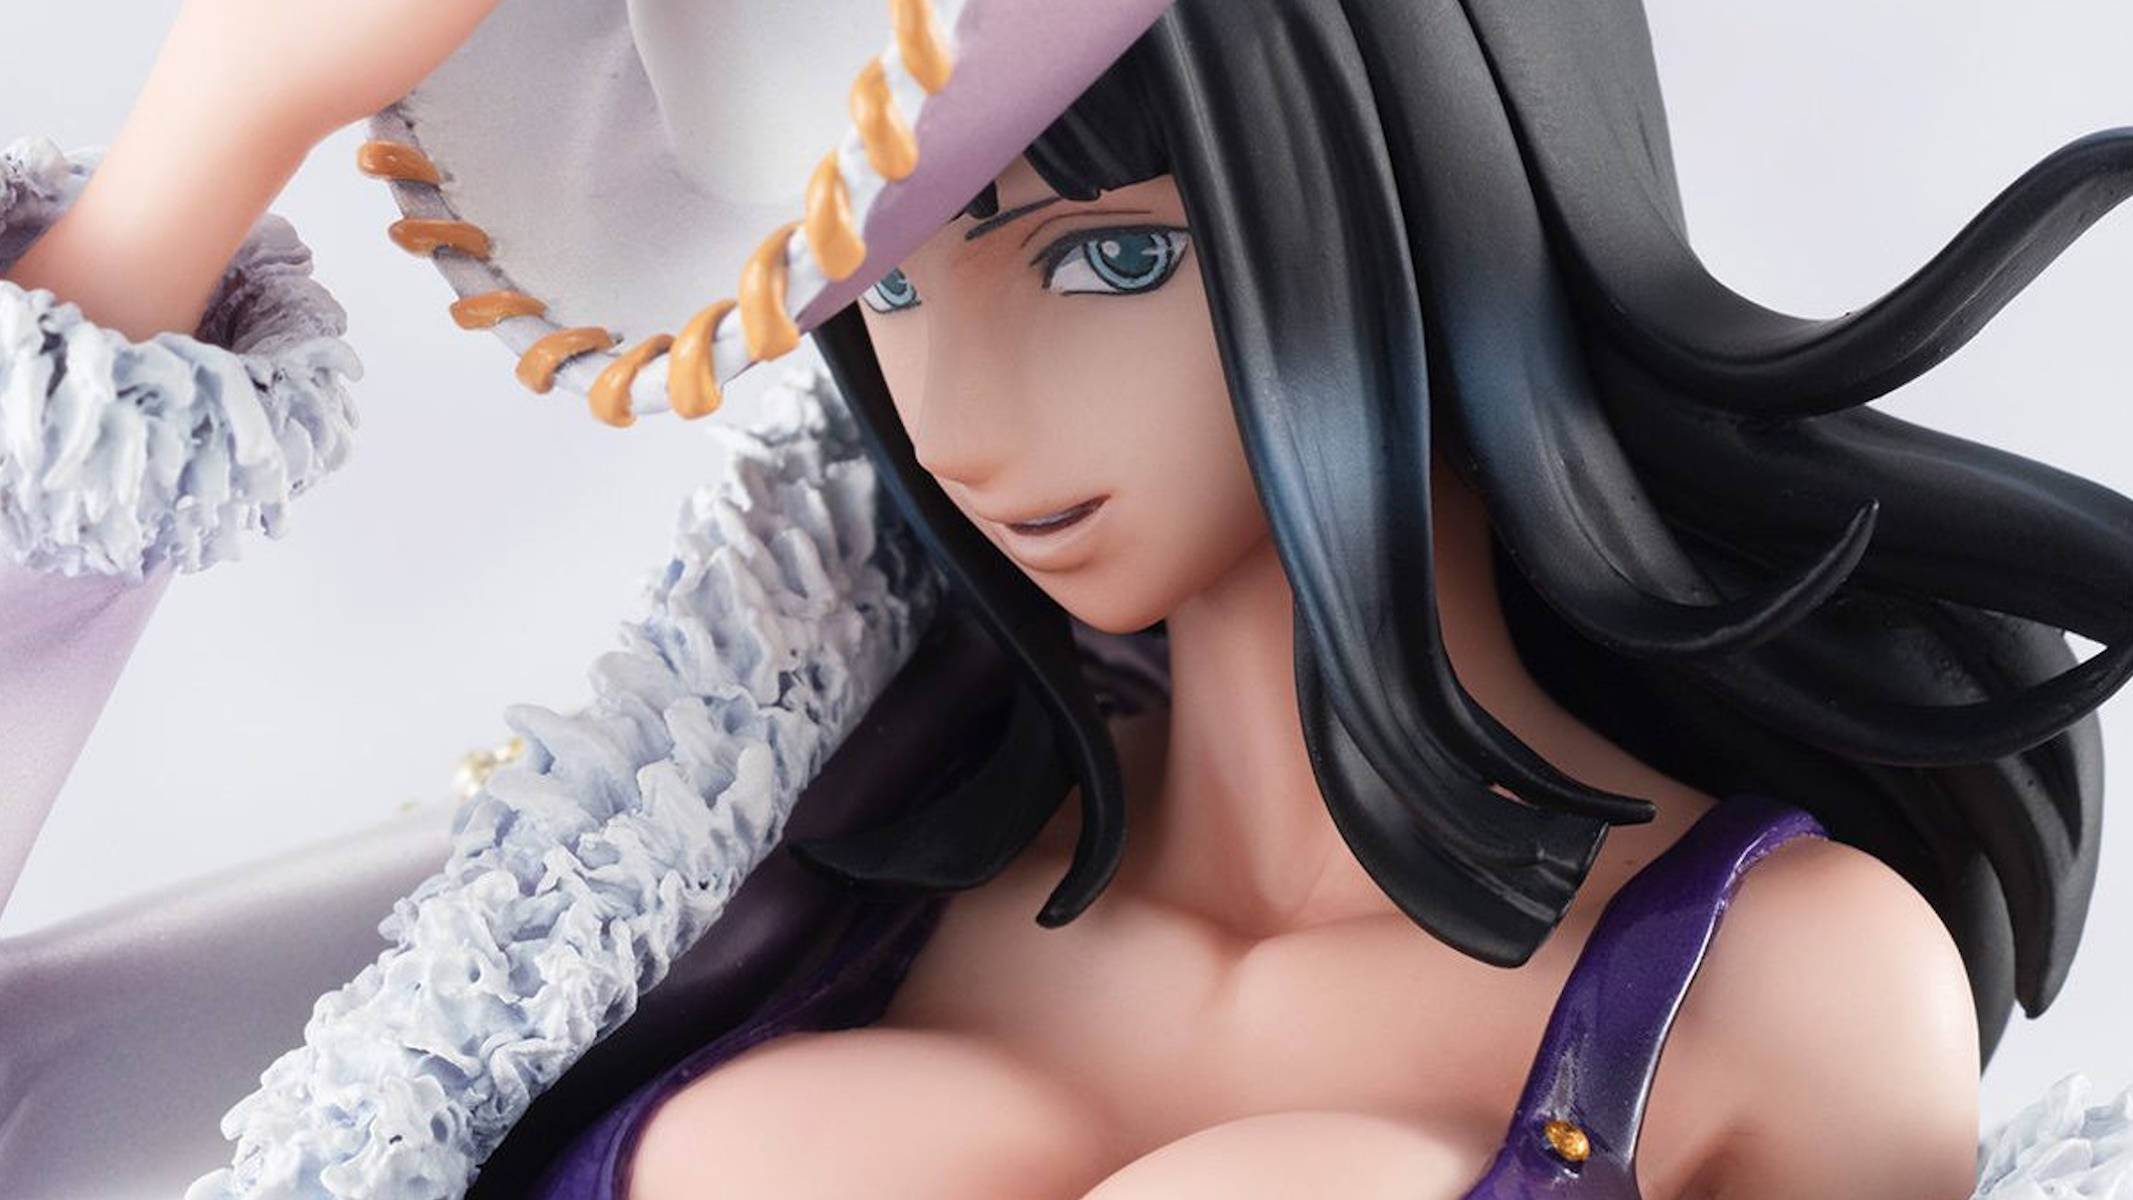 One Piece Action Figure di Nico Robin versione Miss All Sunday